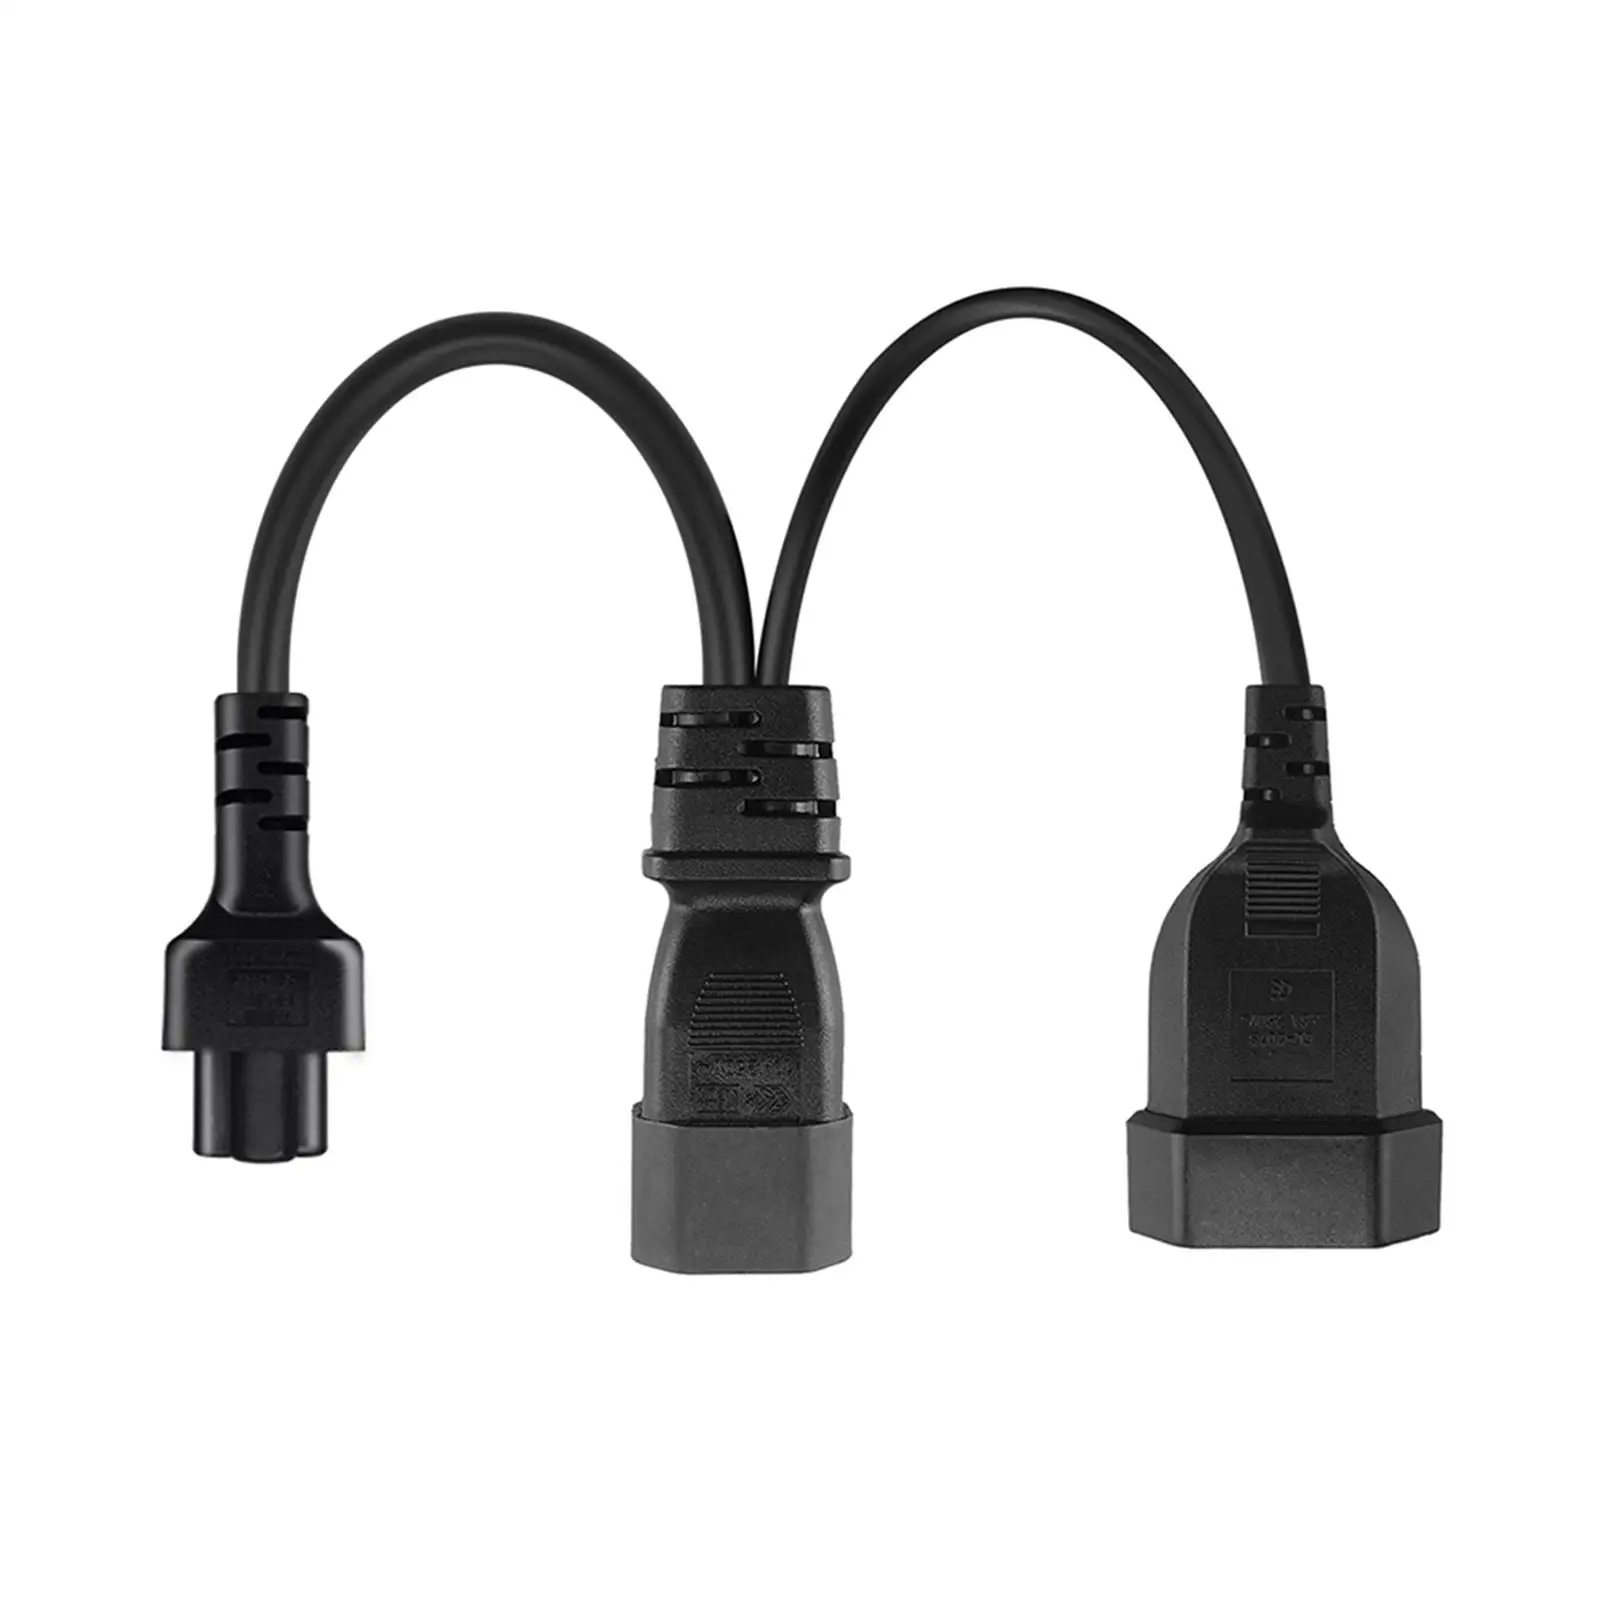 Waterproof C14 Male to  EU Female Convertor Cord 3 Pin to 3 Pin C14 to  Power Cable